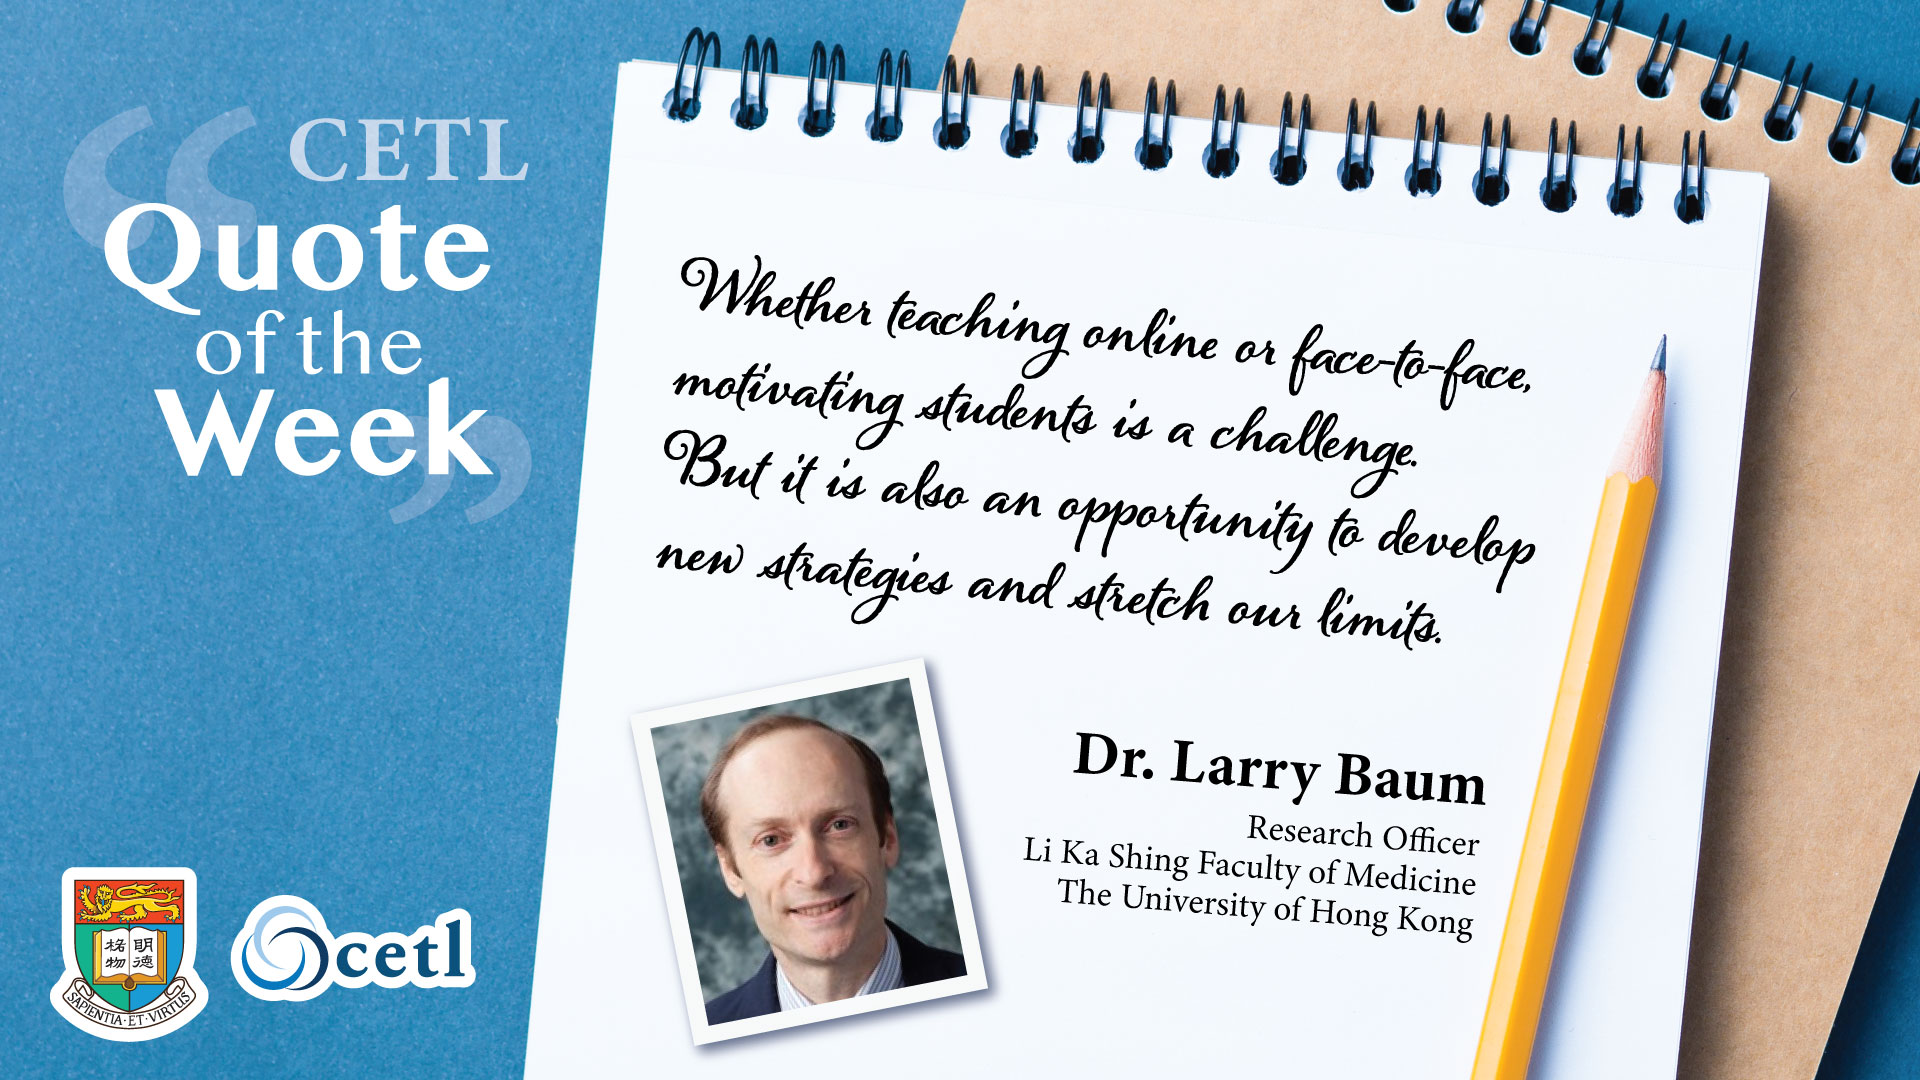 Dr. Larry Baum - Whether teaching online or face-to-face, motivating students is a challenge. But it is also an opportunity to develop new strategies and stretch our limits.